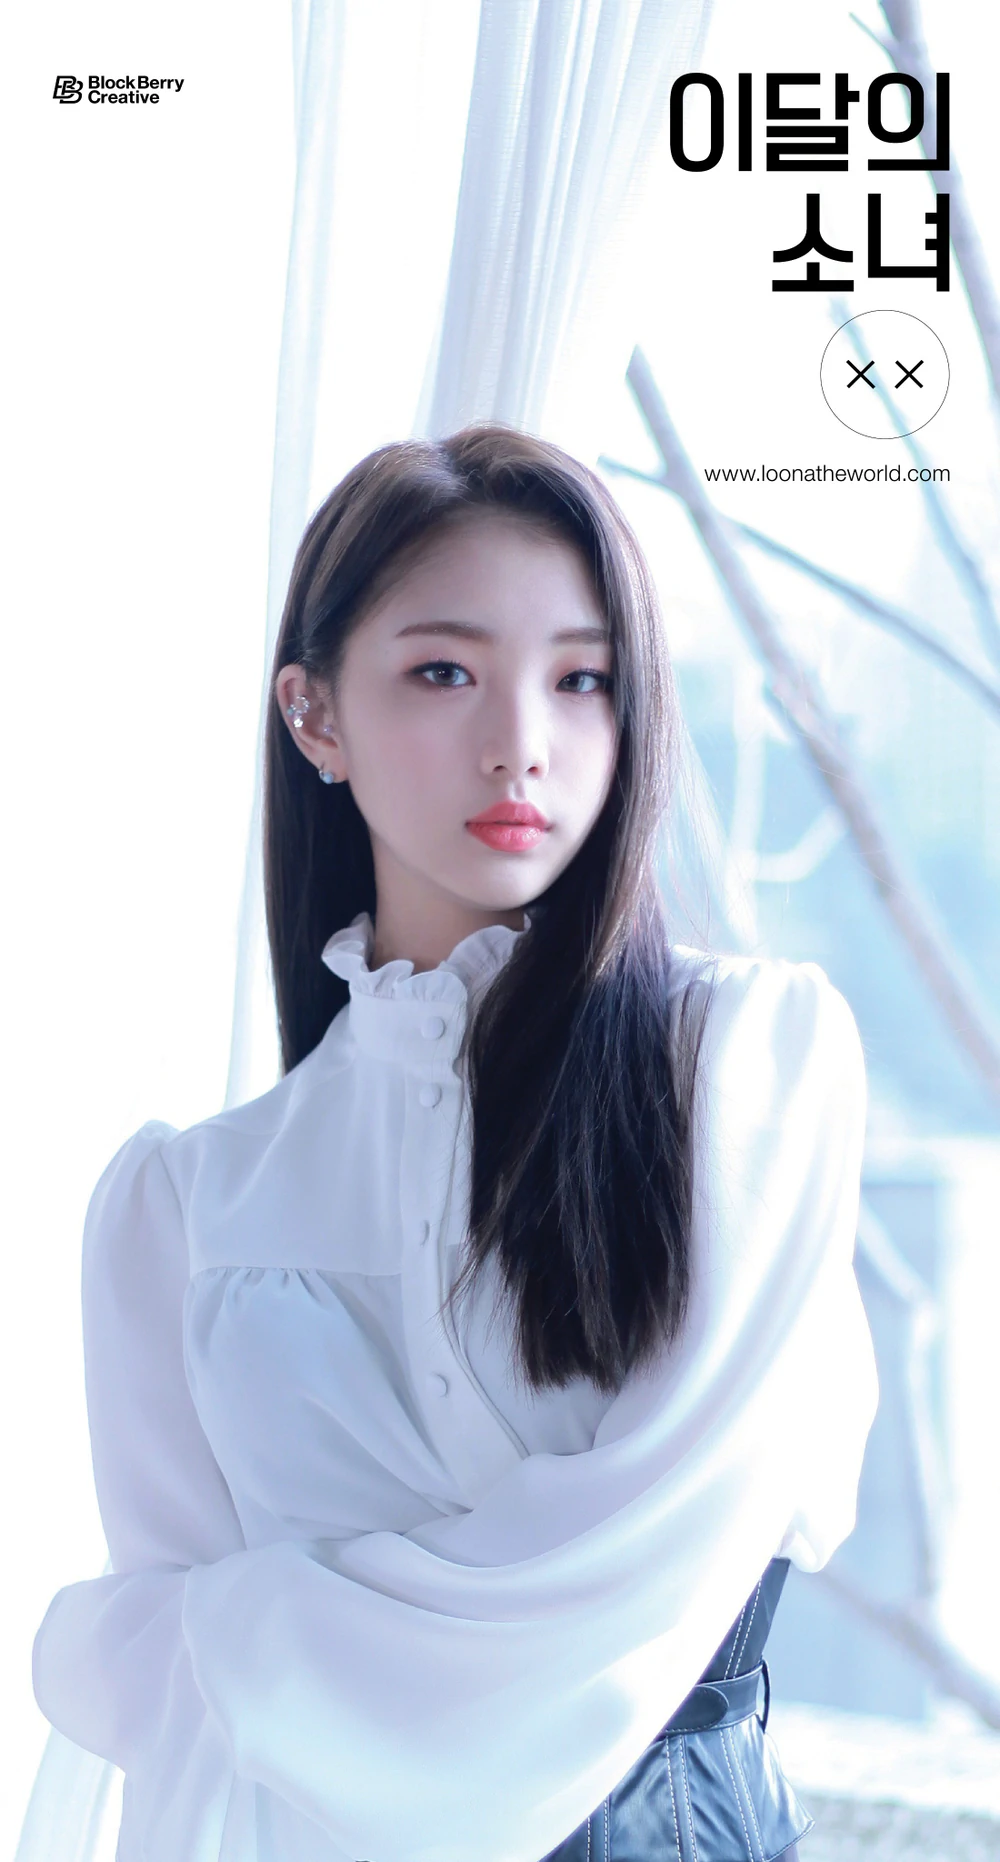 Loona XX Yeojin Concept Teaser Picture Image Photo Kpop K-Concept